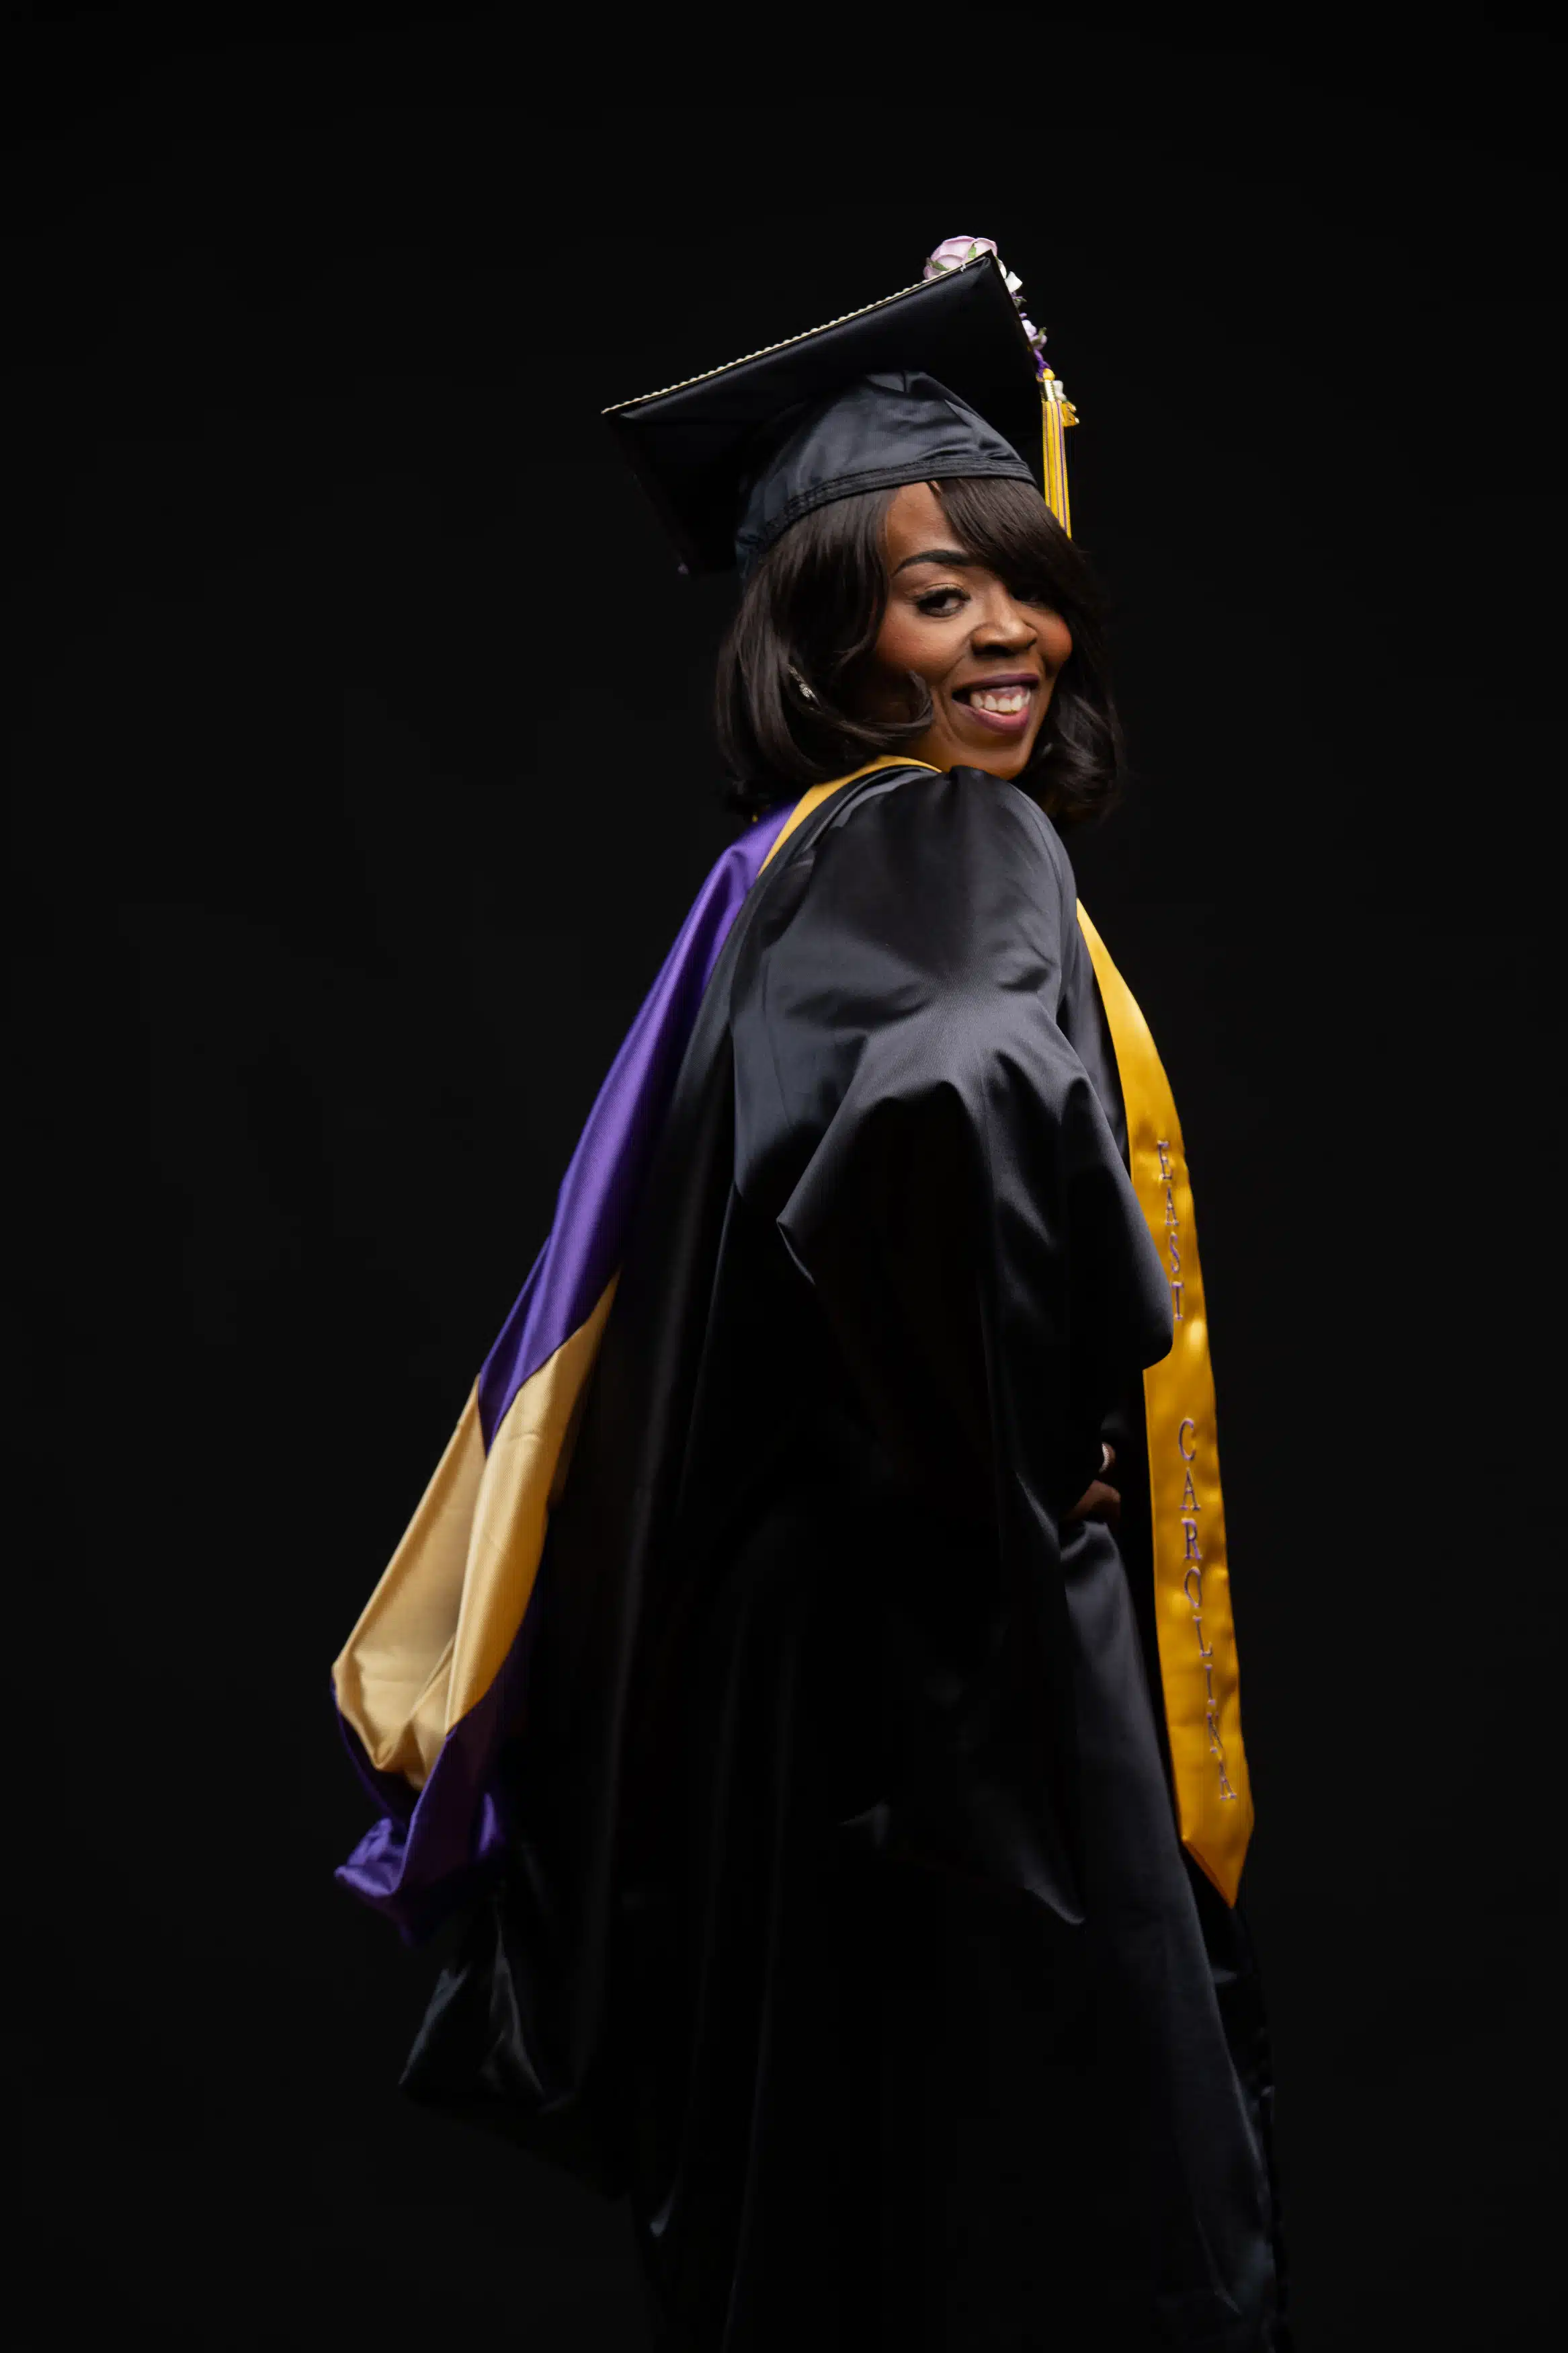 Woman wearing her cap and gown for East Carolina University (ECU) and posing for her graduation photos.